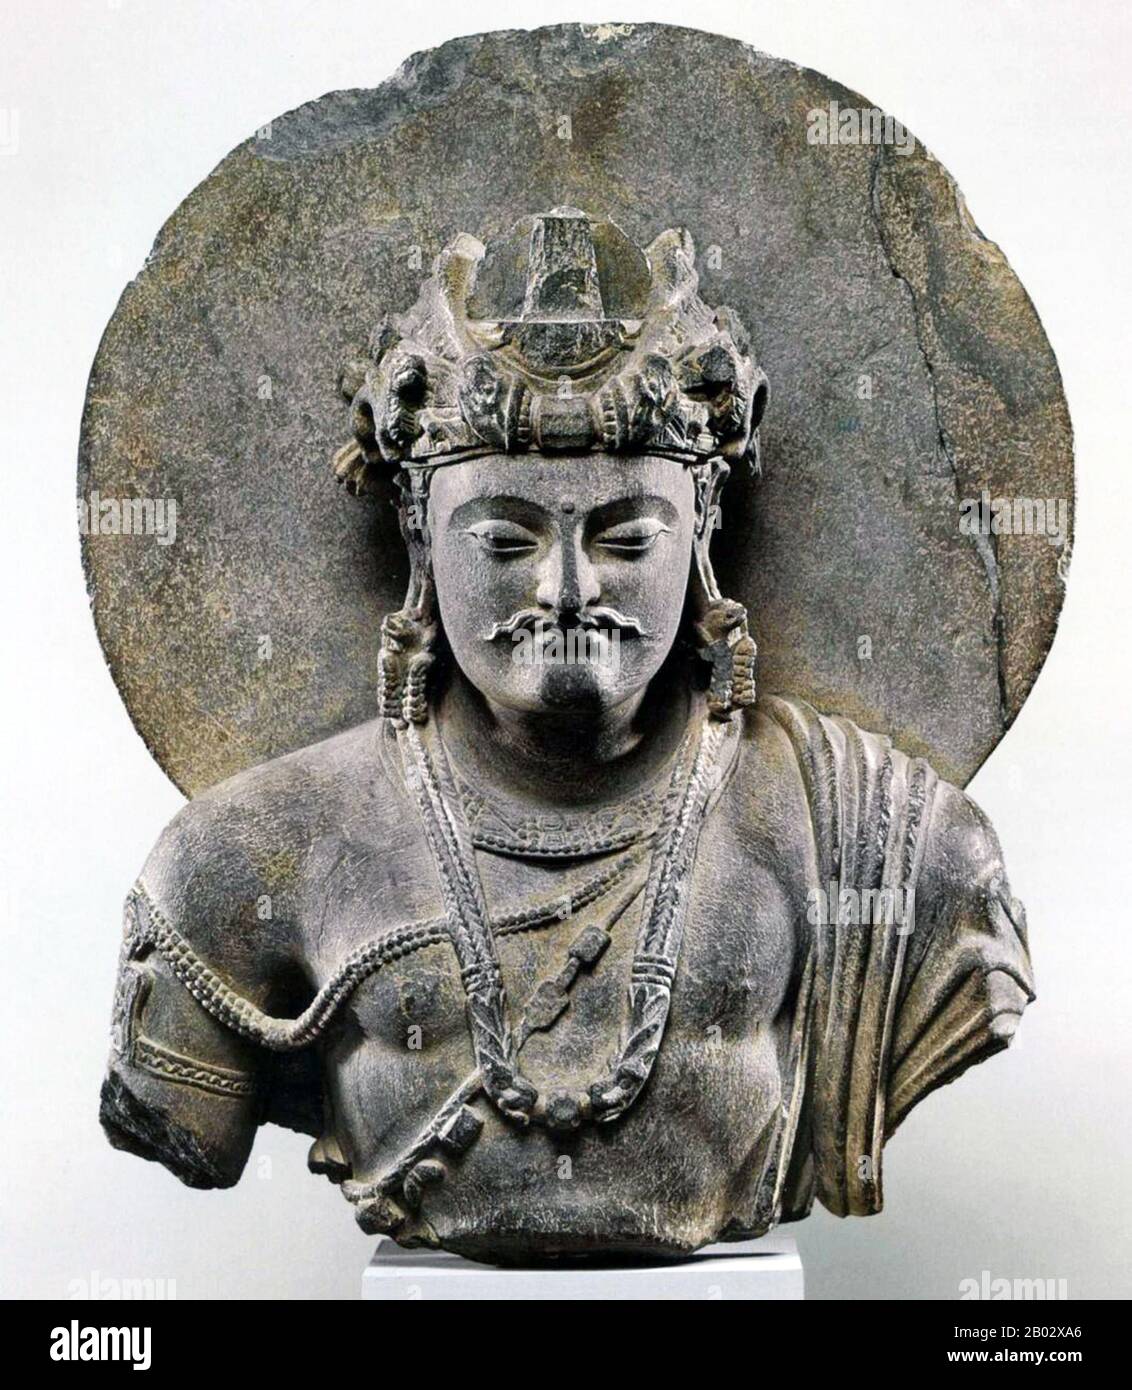 Gandhāra is noted for the distinctive Gandhāra style of Buddhist art, which developed out of a merger of Greek, Syrian, Persian, and Indian artistic influence. This development began during the Parthian Period (50 BCE – 75 CE). Gandhāran style flourished and achieved its peak during the Kushan period, from the 1st to the 5th century. It declined and suffered destruction after invasion of the White Huns in the 5th century.  Stucco as well as stone was widely used by sculptors in Gandhara for the decoration of monastic and cult buildings. Stucco provided the artist with a medium of great plastic Stock Photo